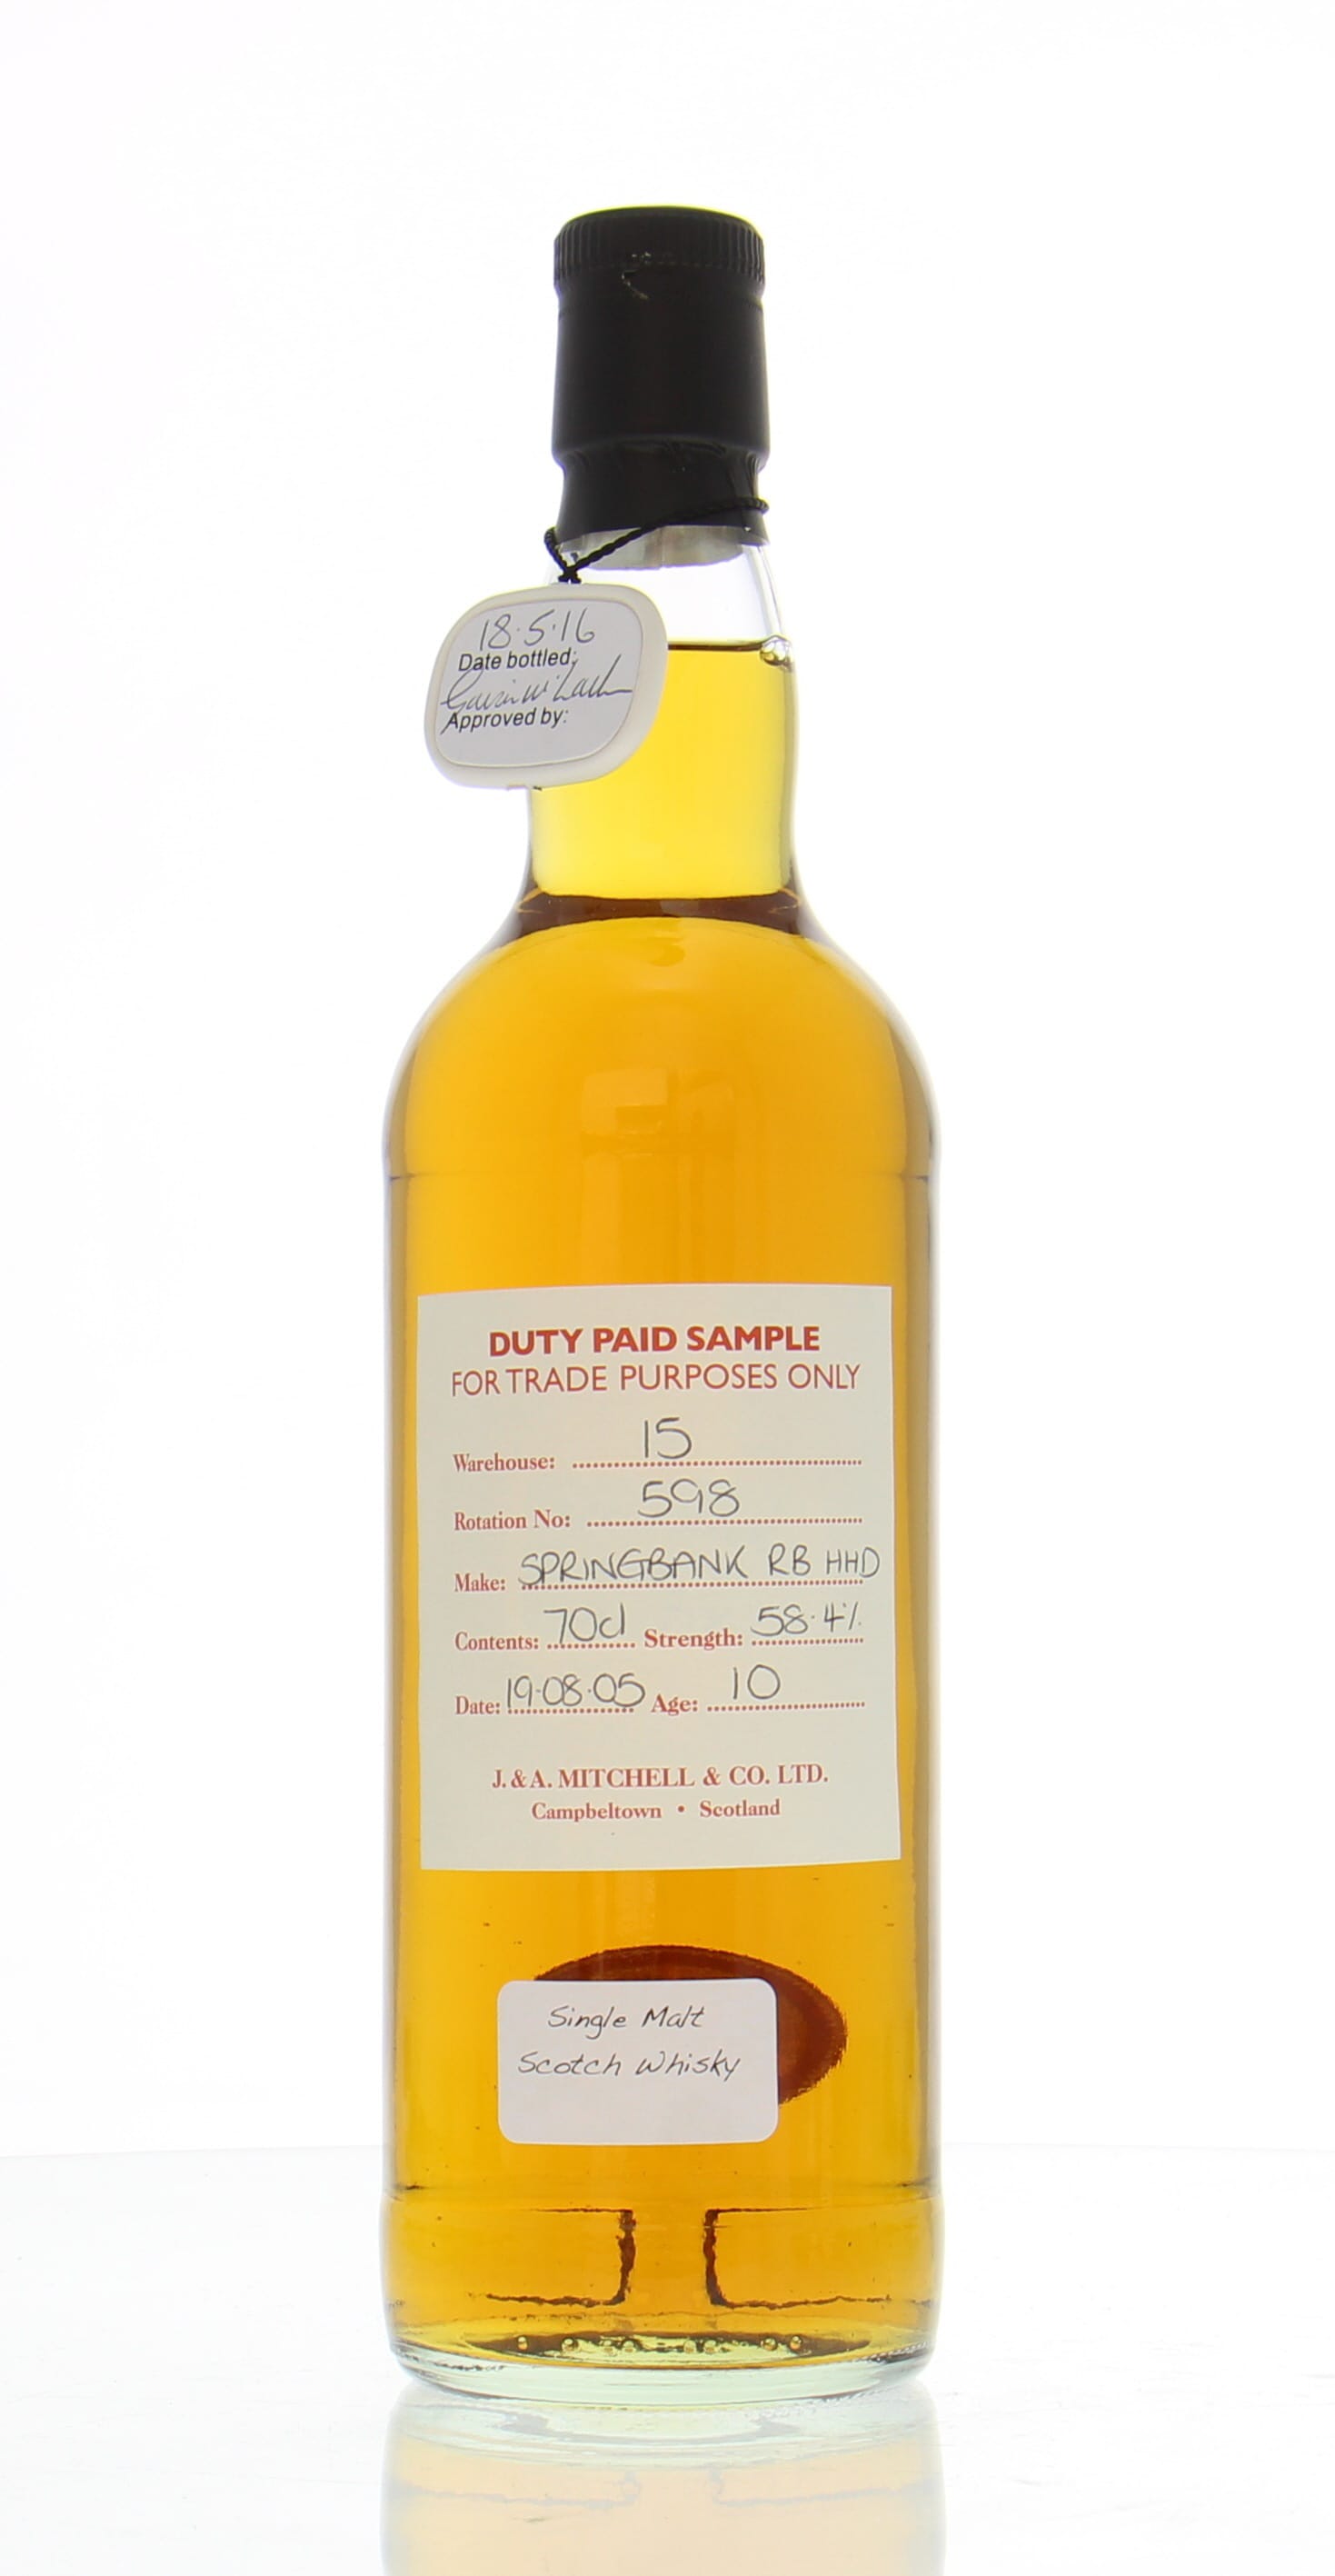 Springbank - 10 Years Old Duty Paid Sample Warehouse 15 Rotation 598 58.4% 2005 Perfect